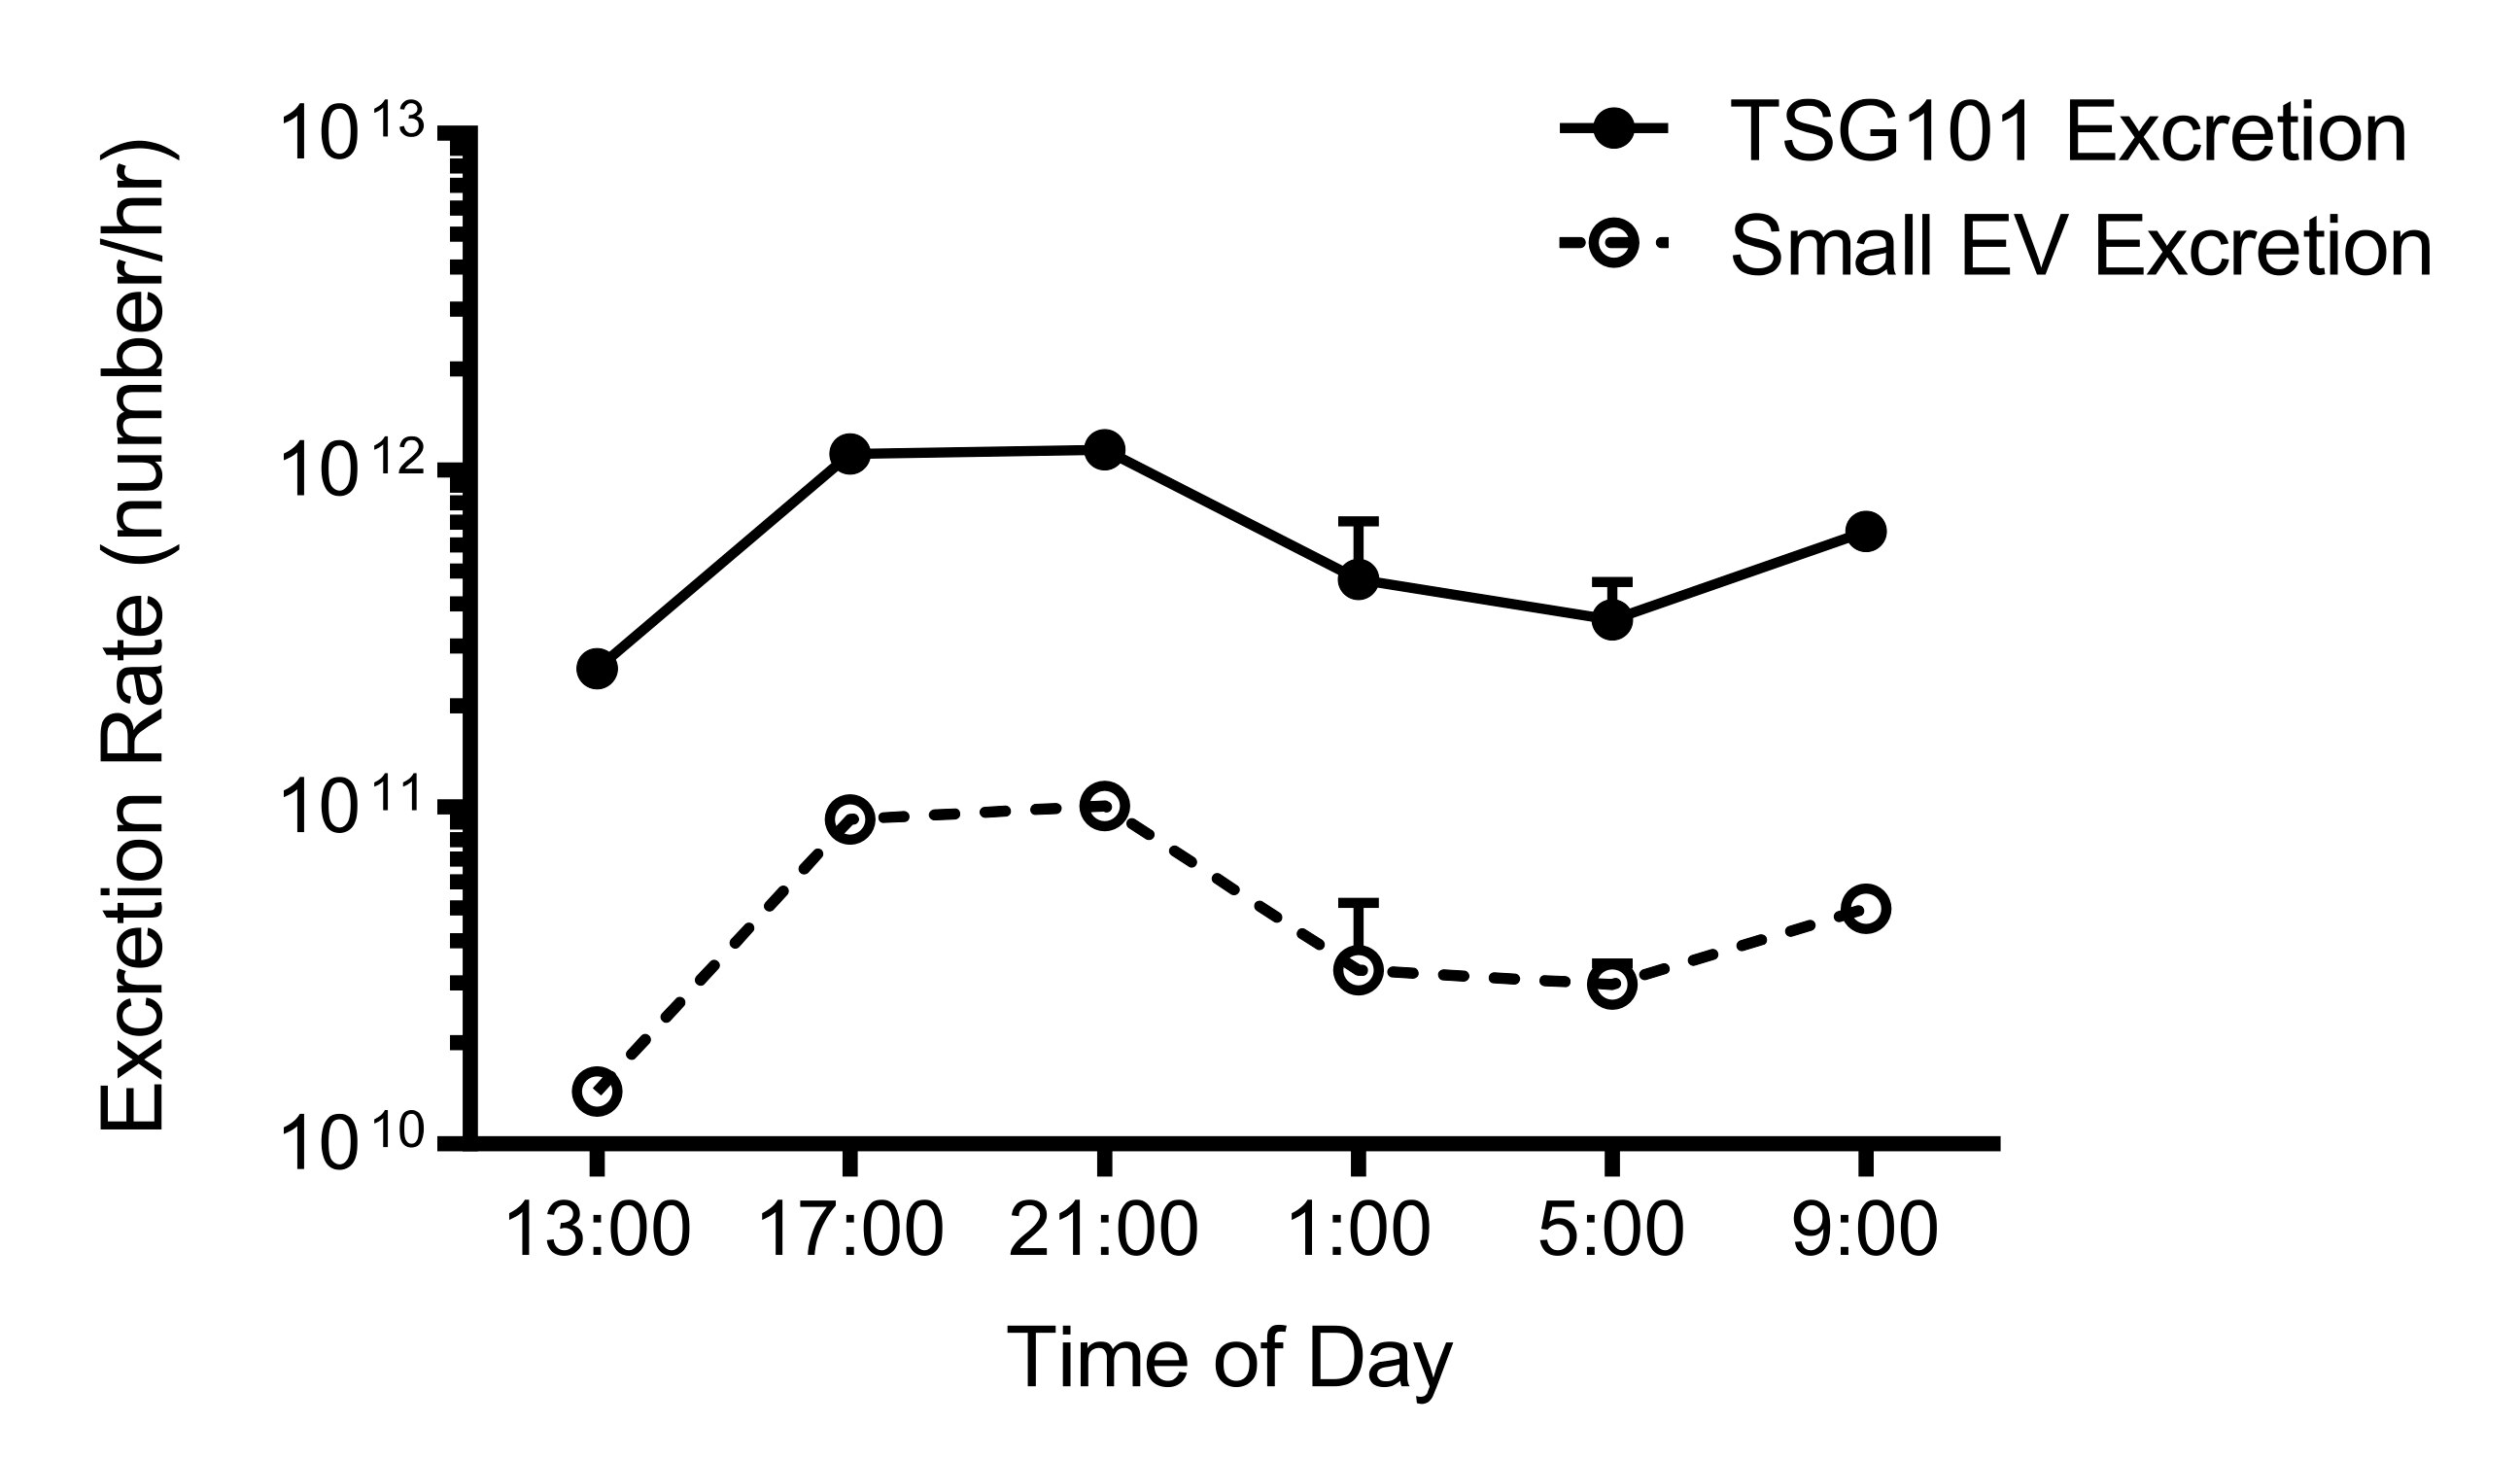 Circadian pattern shows parallel excretion of exosomes and TSG101 in urine, revealing a constant stoichiometry of 10 molecules of TSG101/exosome.